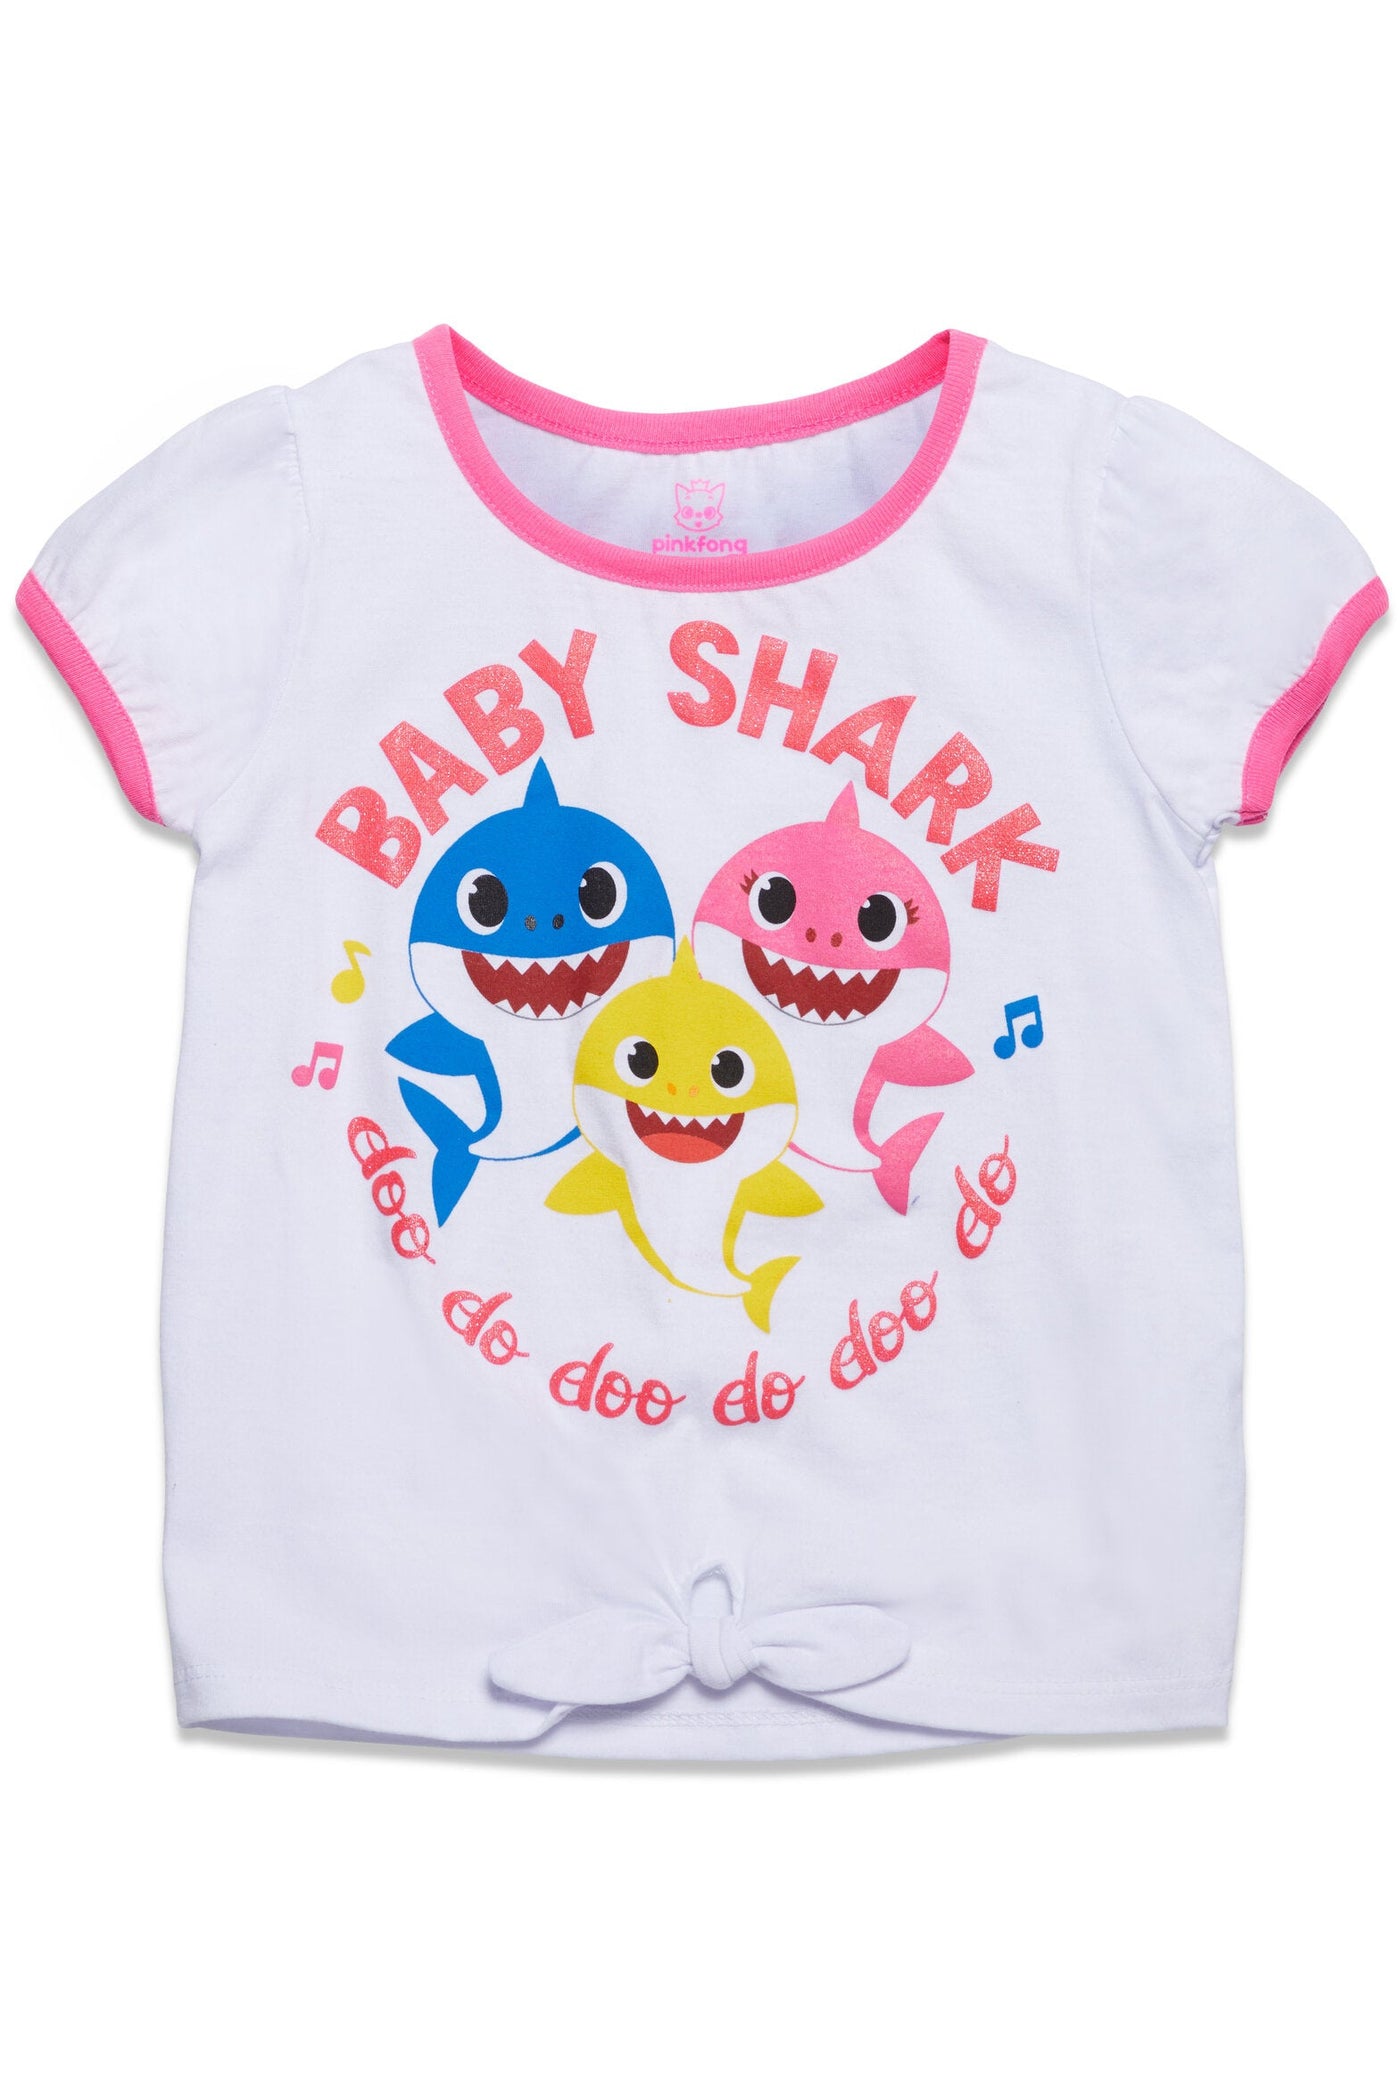 Pinkfong Baby Shark Graphic T-Shirt Bike Shorts and Outfit Set